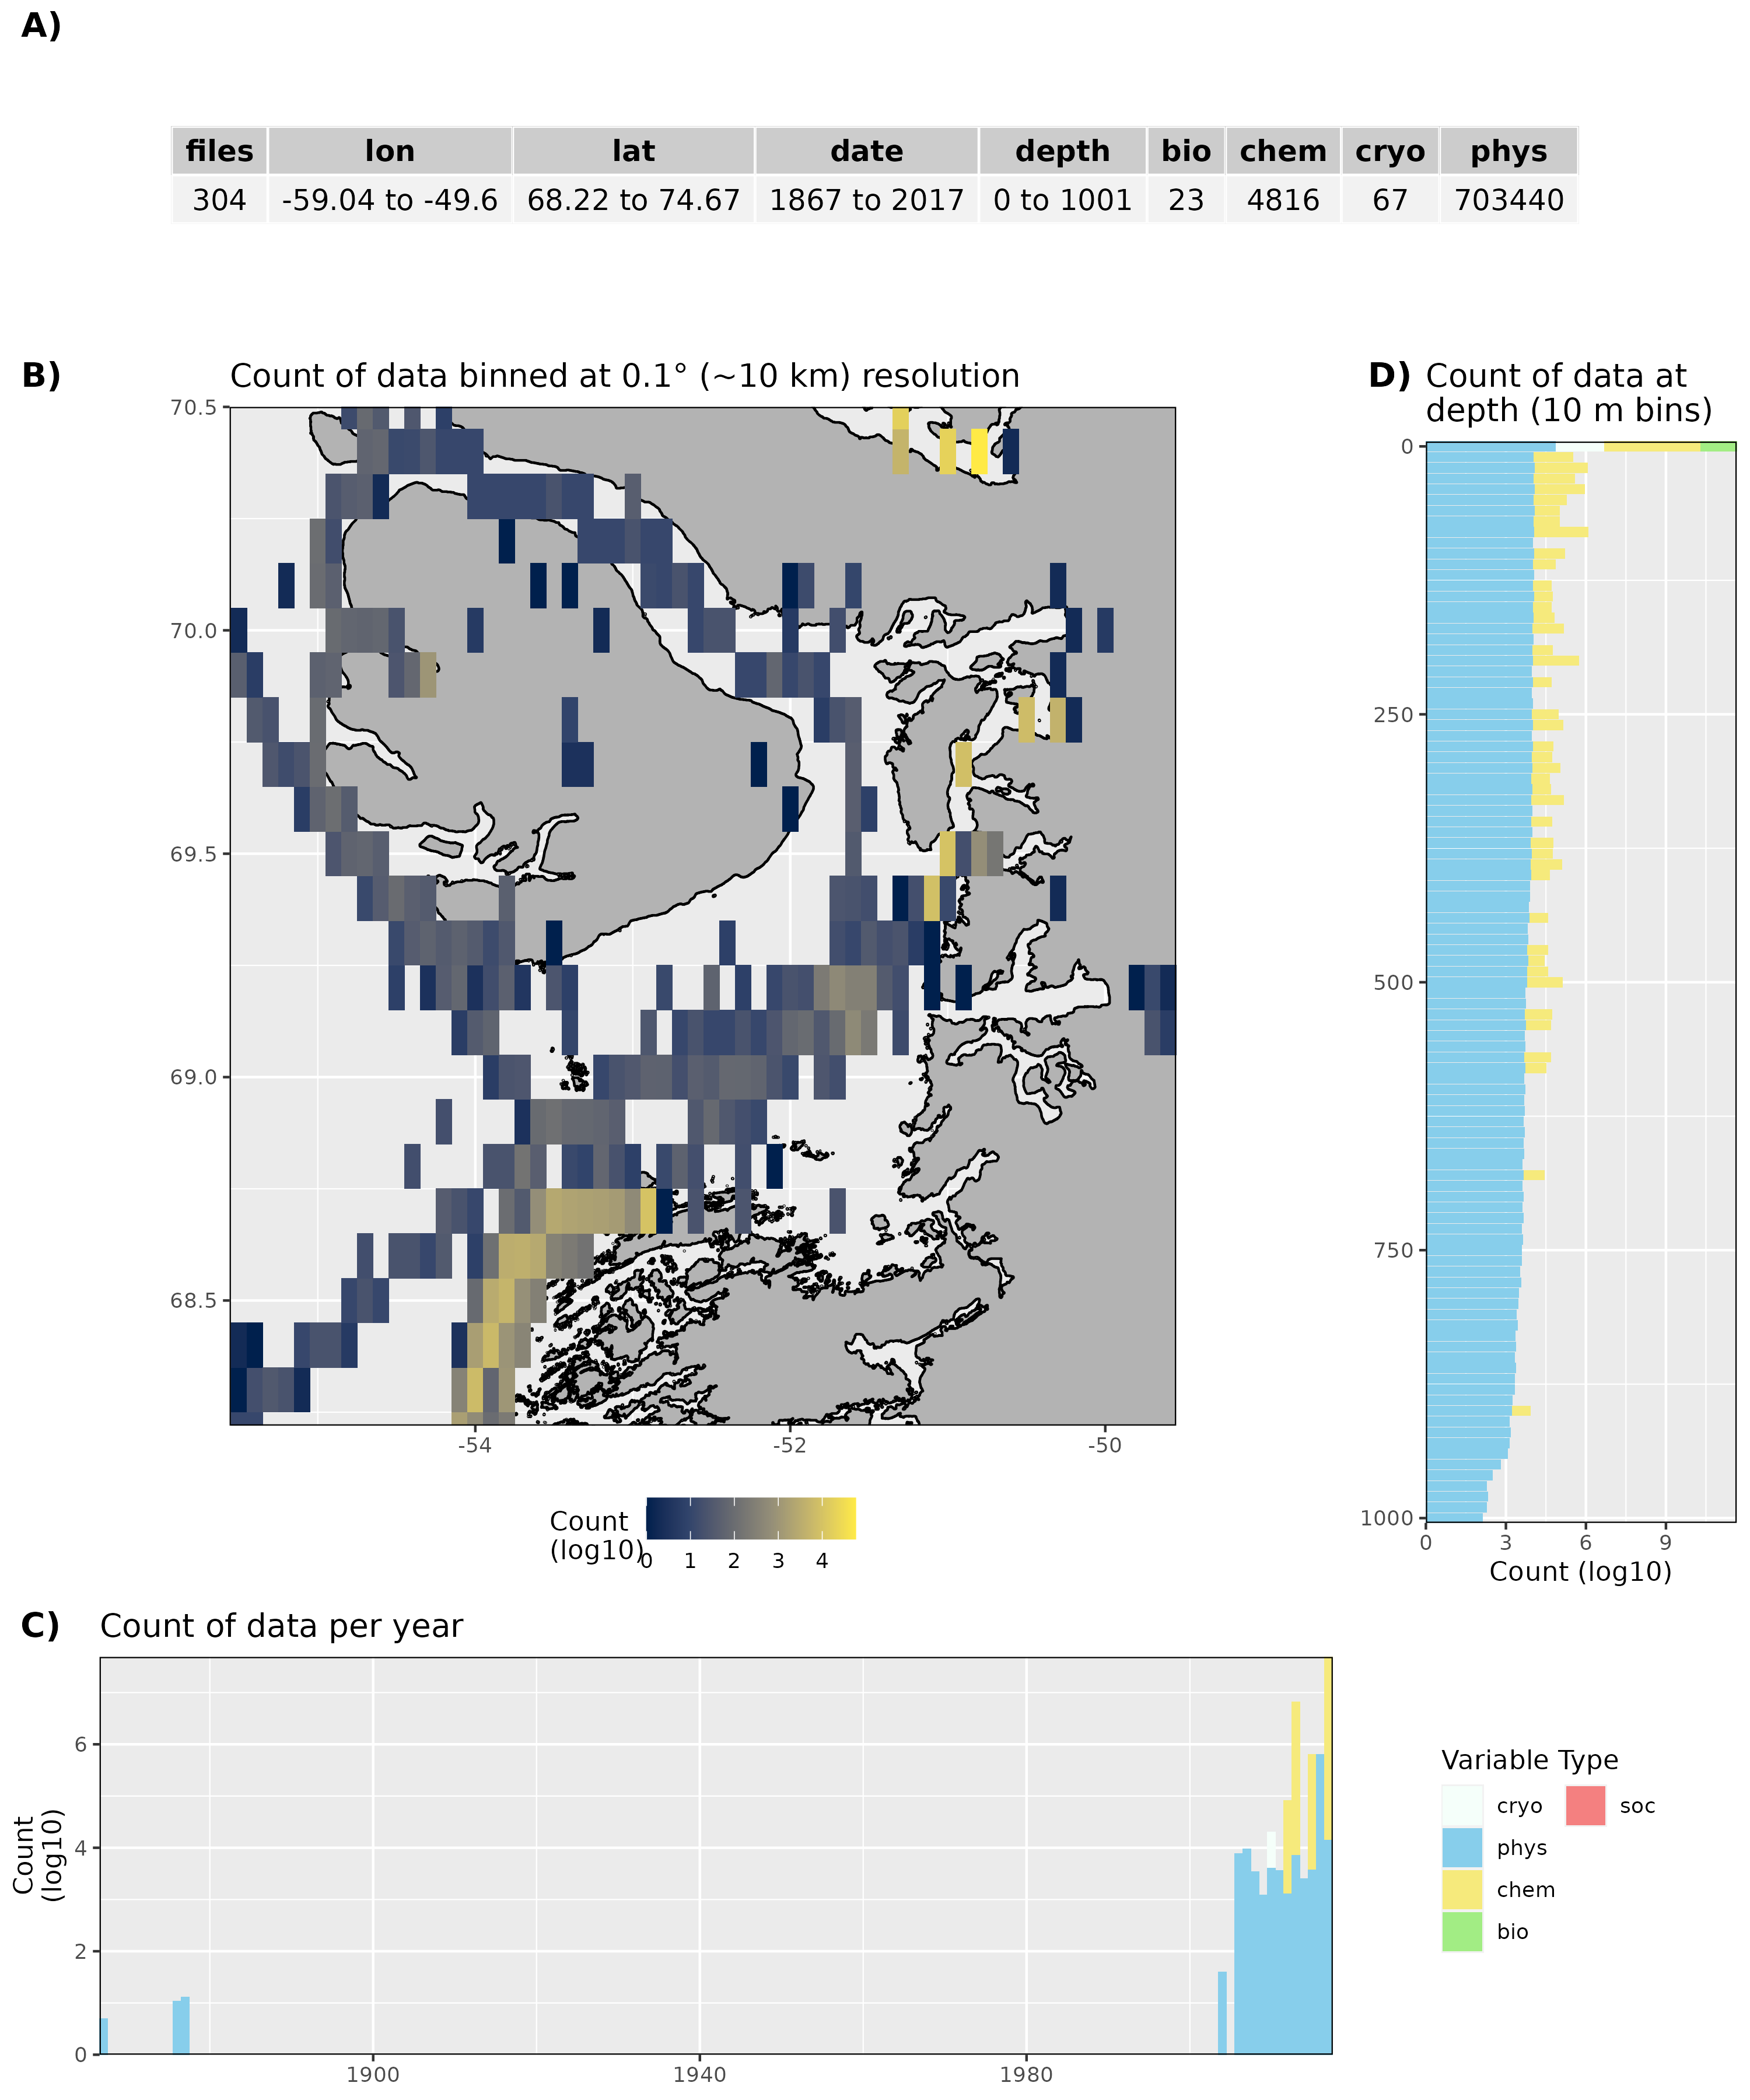 Figure 13: High level overview of the data available for Disko Bay. The acronyms for the variable groups seen throughout the figure are: bio = biology, chem = chemistry, cryo = cryosphere, phys = physical, soc = social (currently there are no bio or soc data for Disko Bay). A) Metadata showing the range of values available within the data. B) Spatial summary of data available per ~10 km grouping. C) Temporal summary of available data. D) Summmary of data available by depth. Note that all of the data summaries are log10 transformed. For C) and D) the log10 transformation is applied before the data are stacked by category, which gives the impression that there are much more data are than there are.